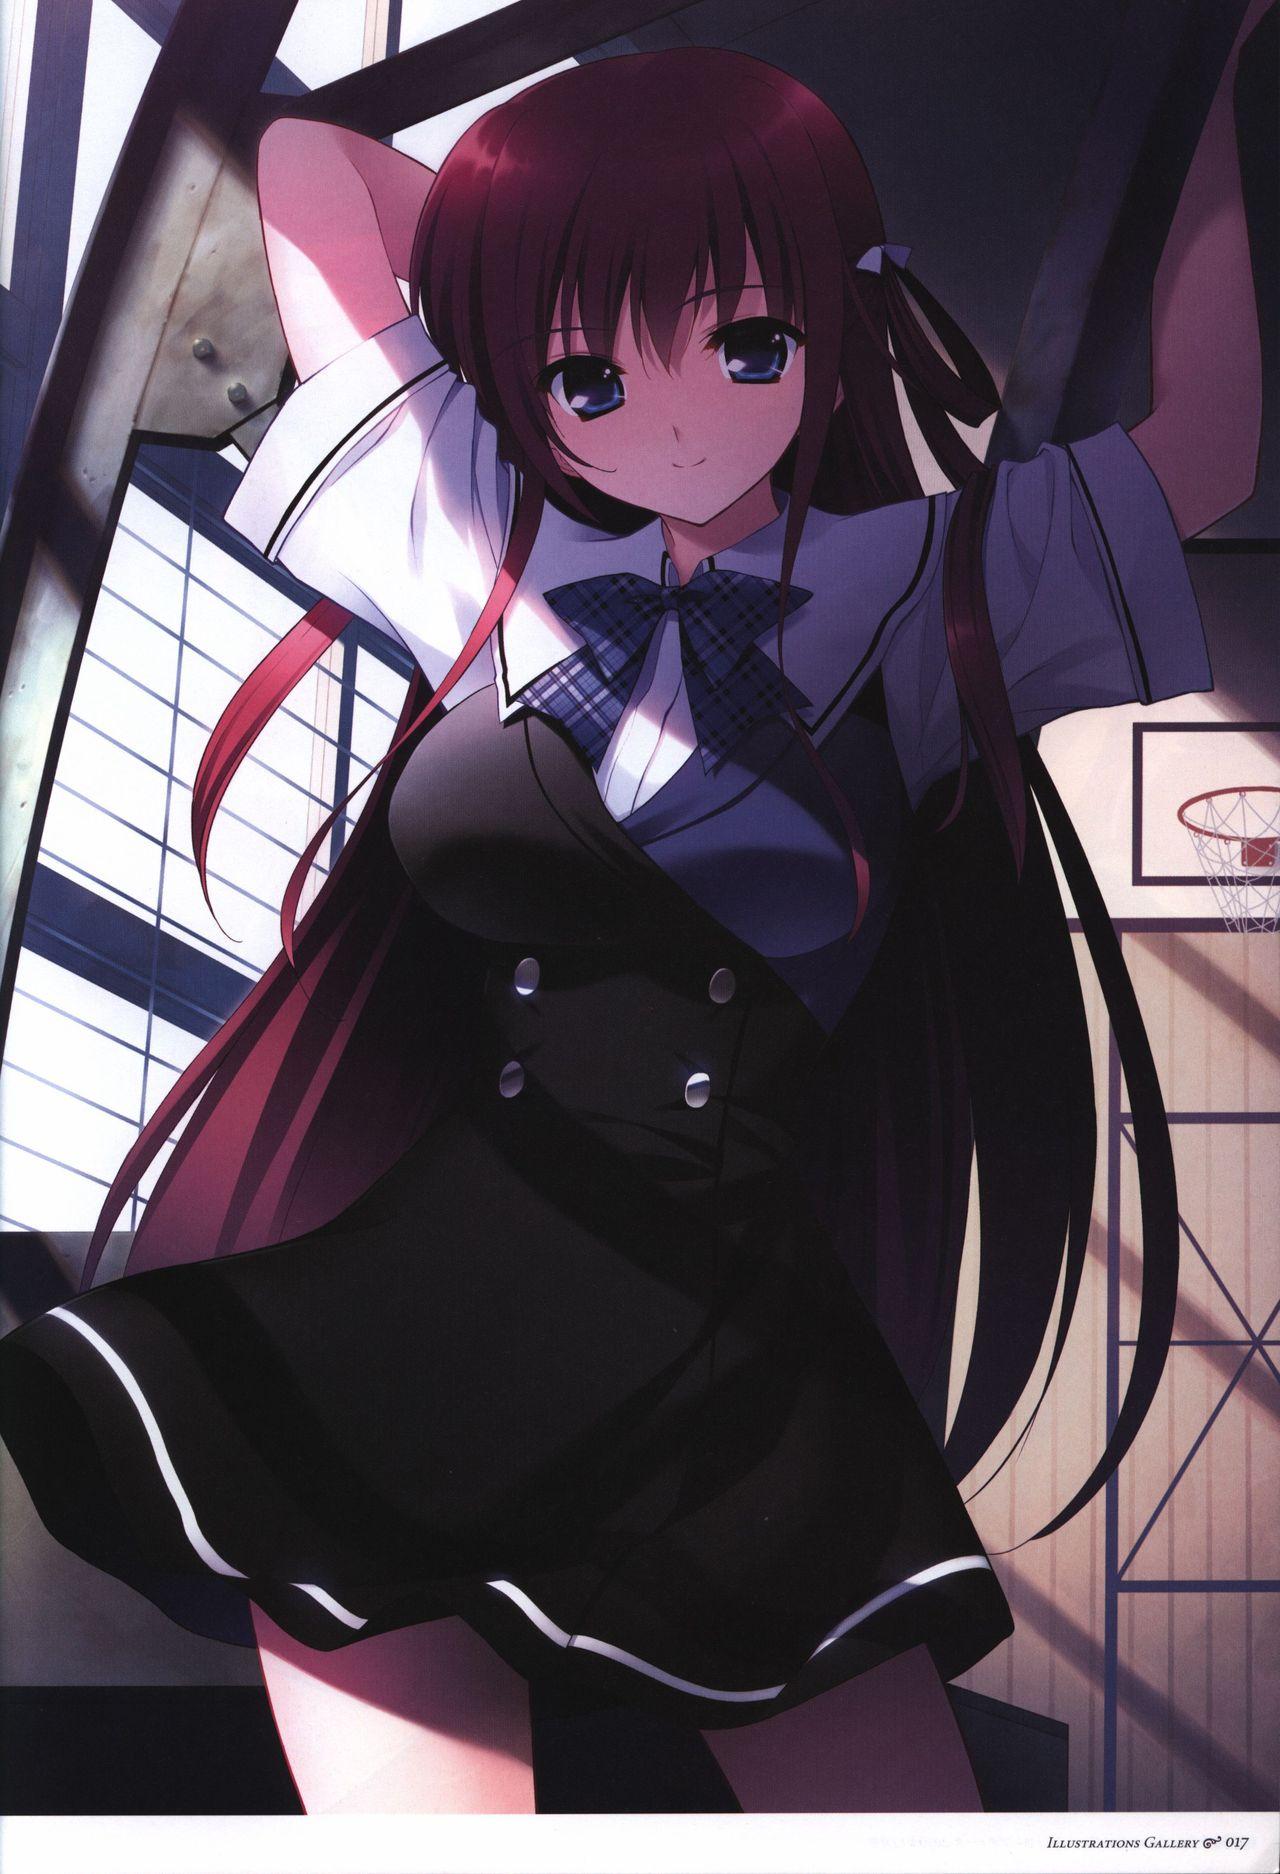 The Fruit of Grisaia Visual FanBook 17